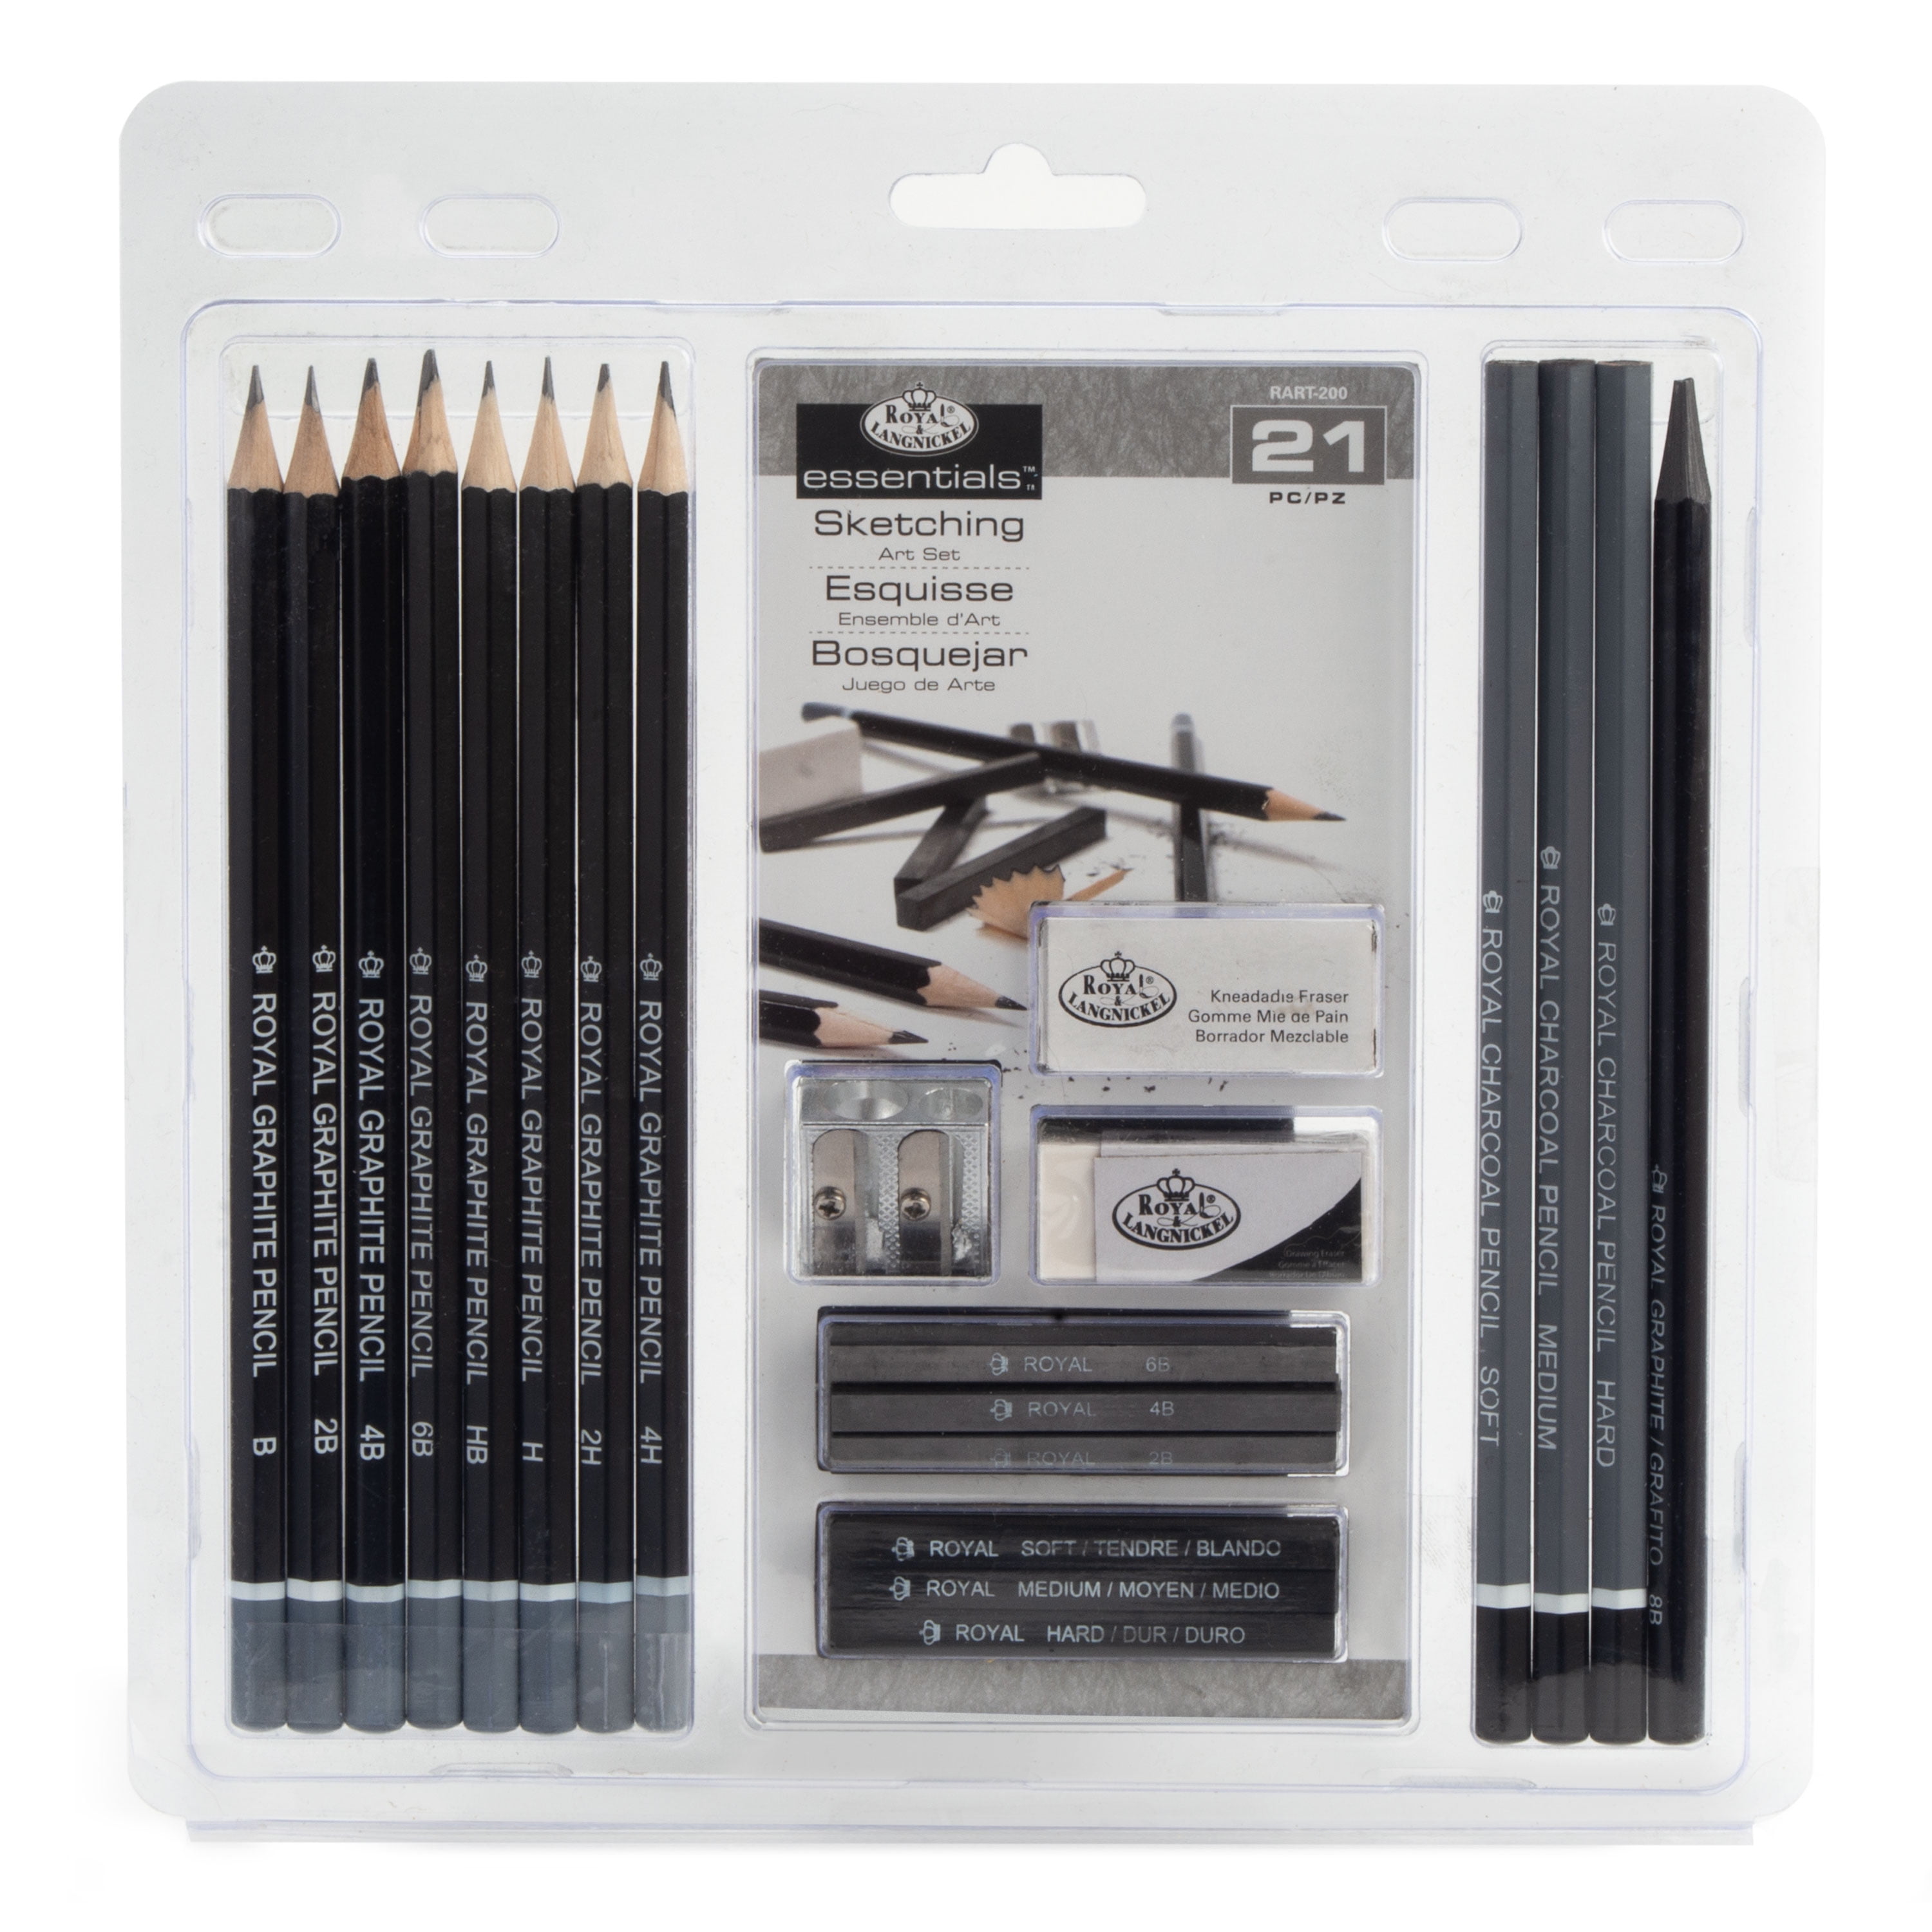 The latest The Art Studio Artist Sketching Starter Pack 637 version is now  available at a price that is incredibly affordable! Prices